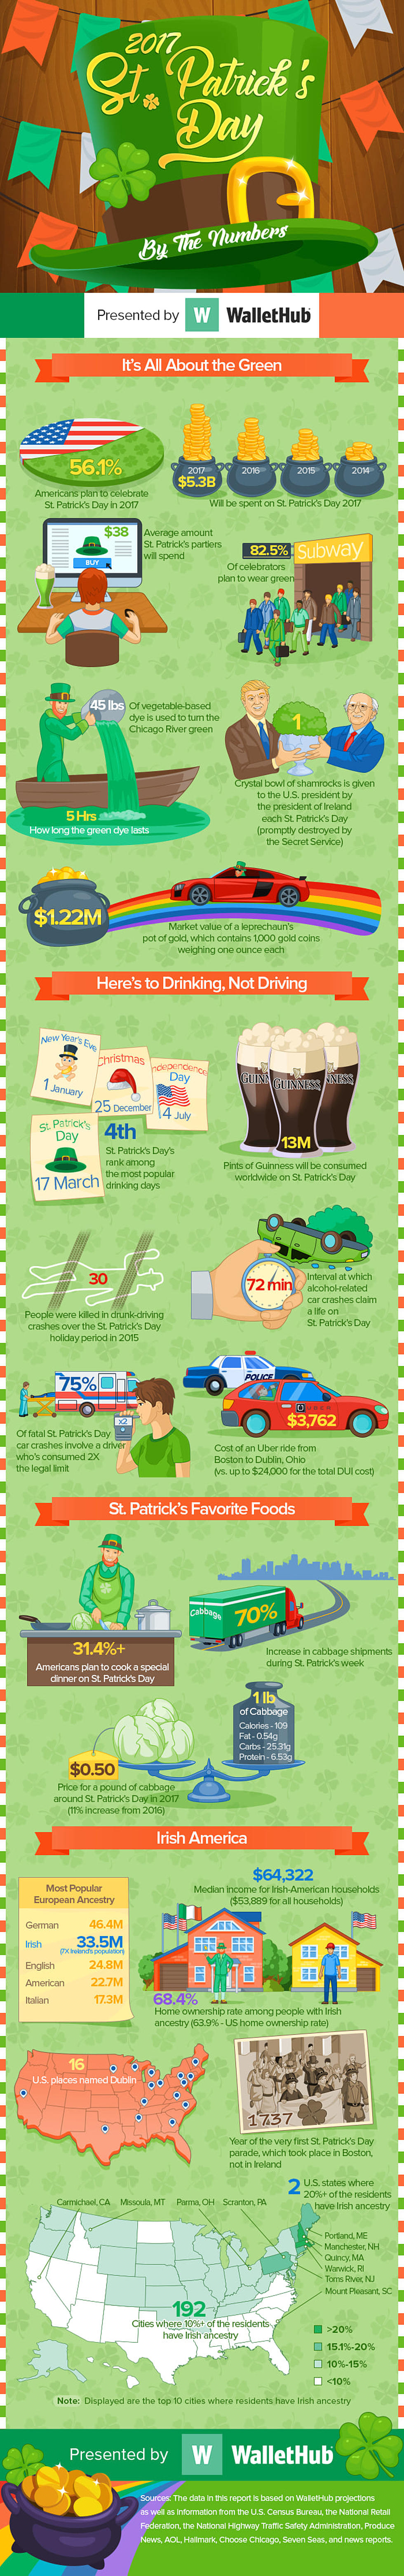 Enjoy These St. Patrick’s Day Facts and Figures That Will Blow Your Irish-Lovin’ Mind